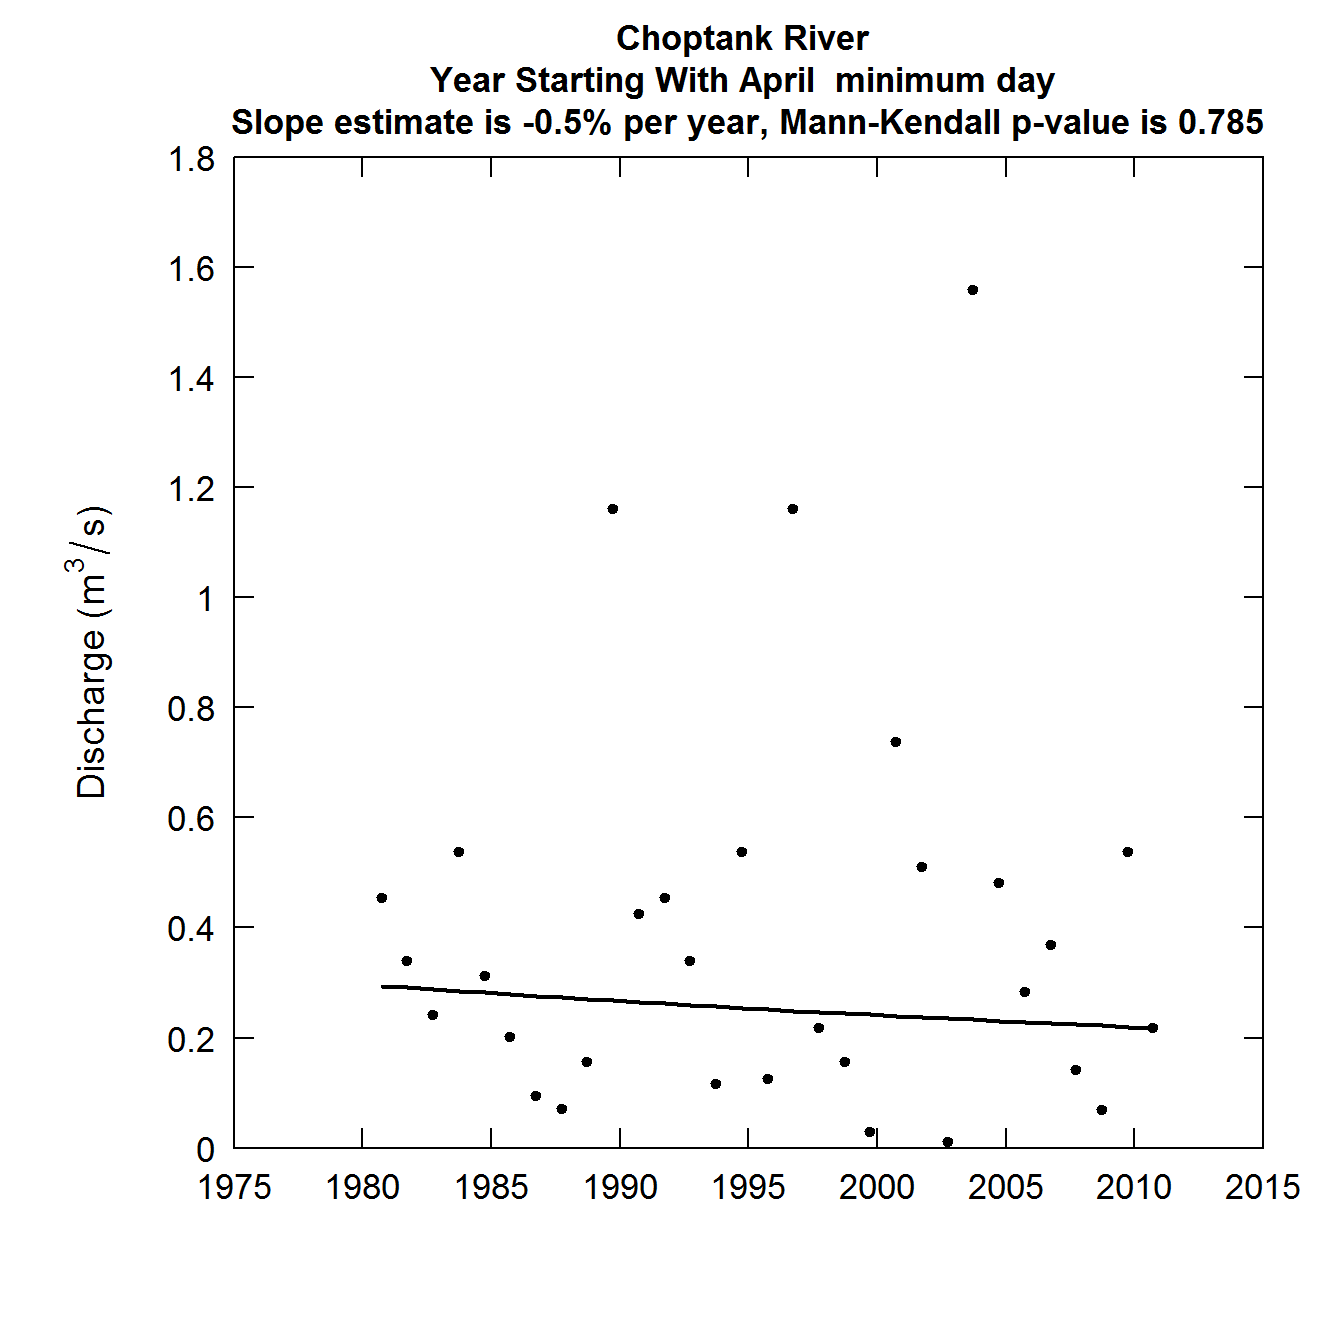 Discharge as a function of Year, slope estimates and Mann-Kendall p-value